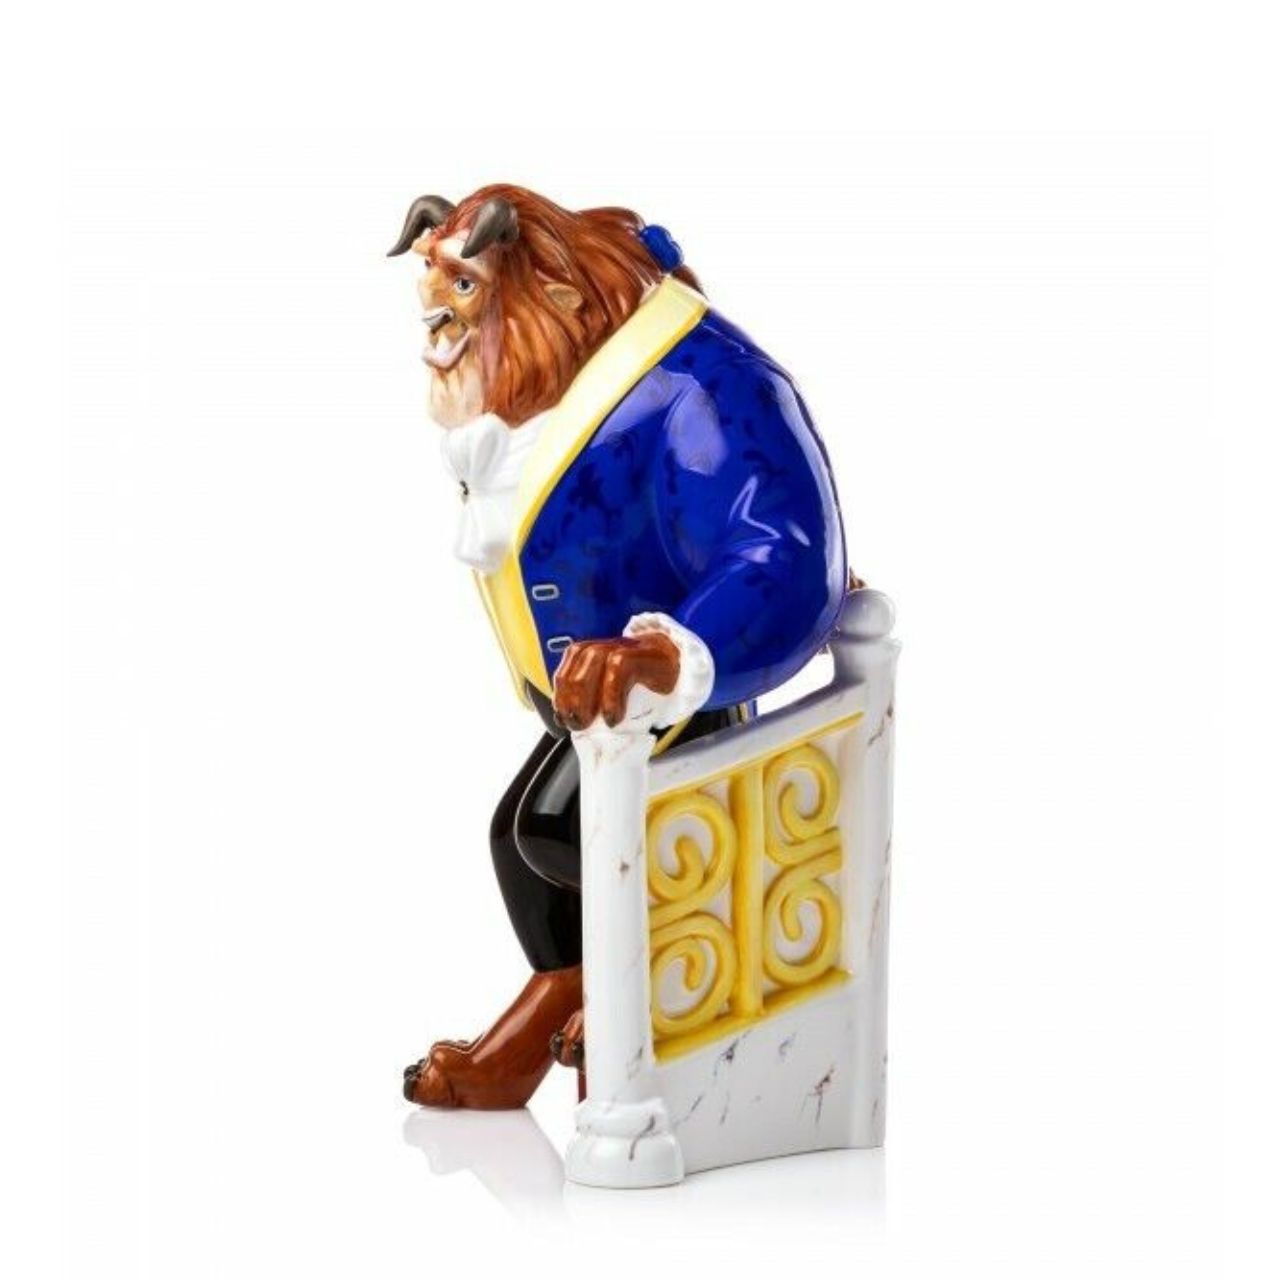 English Ladies Company Disney The Beast  Every Belle needs her Beast!  The Beast from Beauty and the Beast is here!! The Beast stands at 32cm tall on a set of luxurious marble stairs. Made from Fine Bone China and with a touch of real gold detailing his past mistakes may make others want to avoid him, but we sure can see his inner beauty!